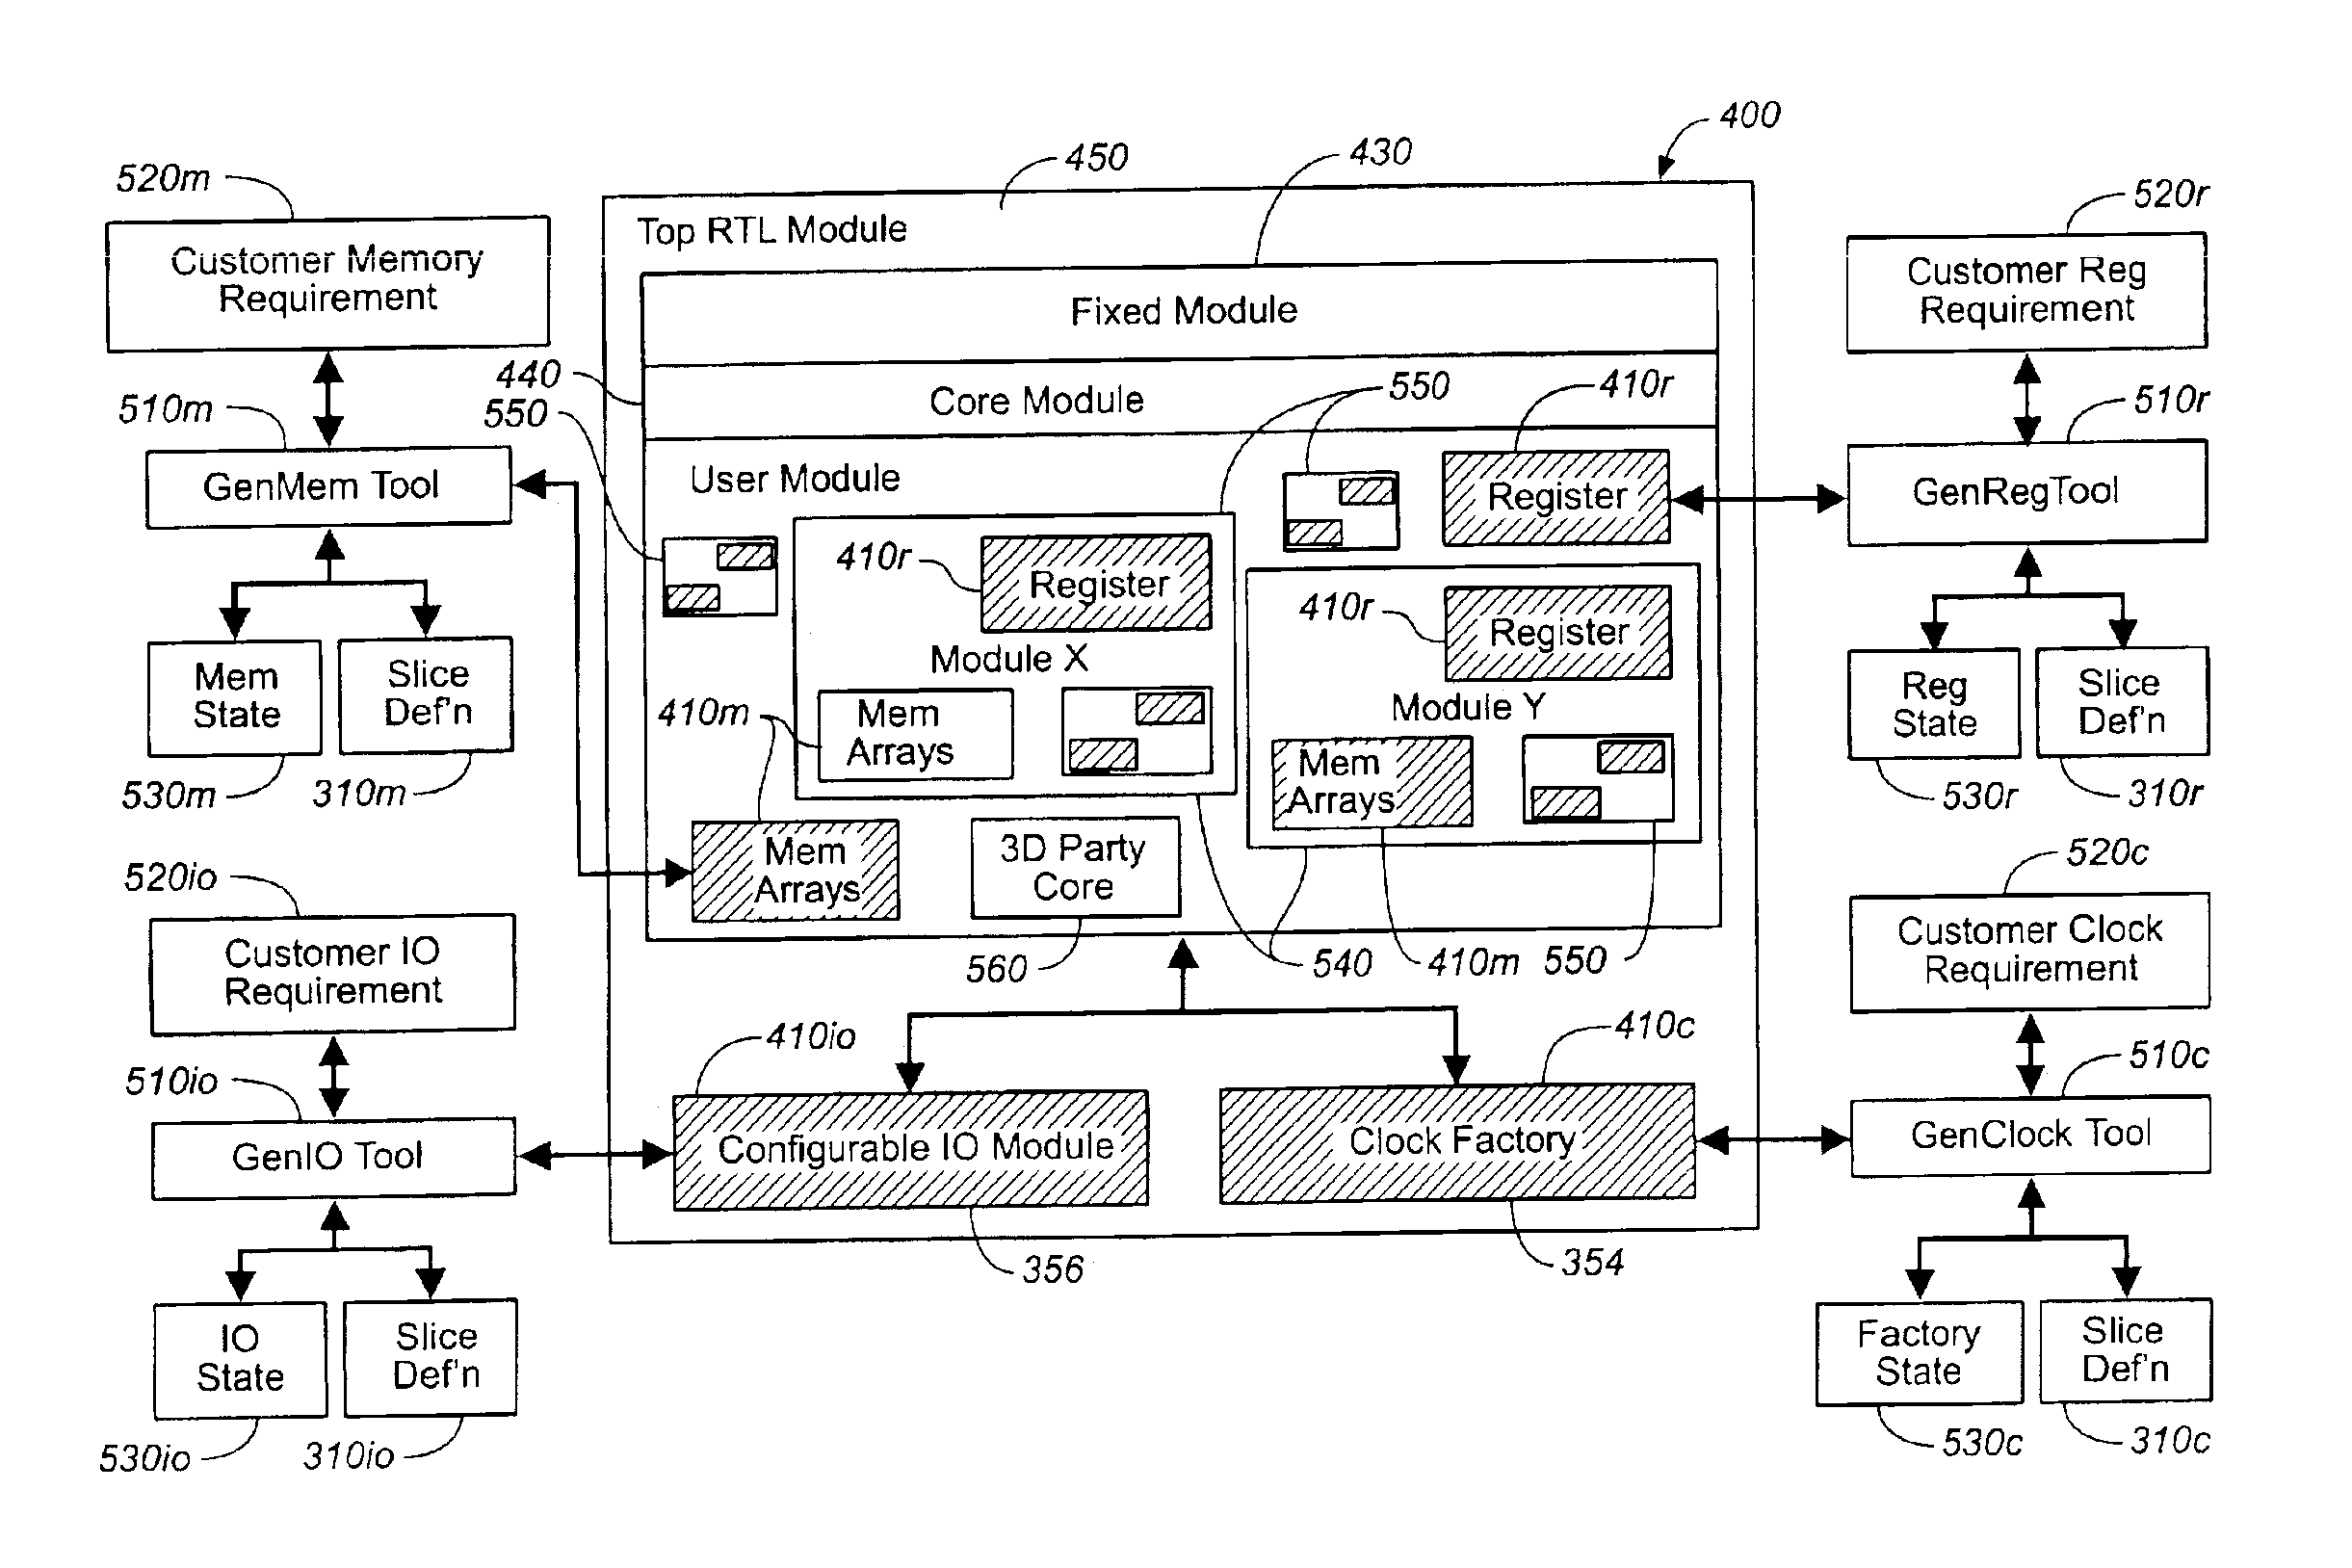 Simplified process to design integrated circuits